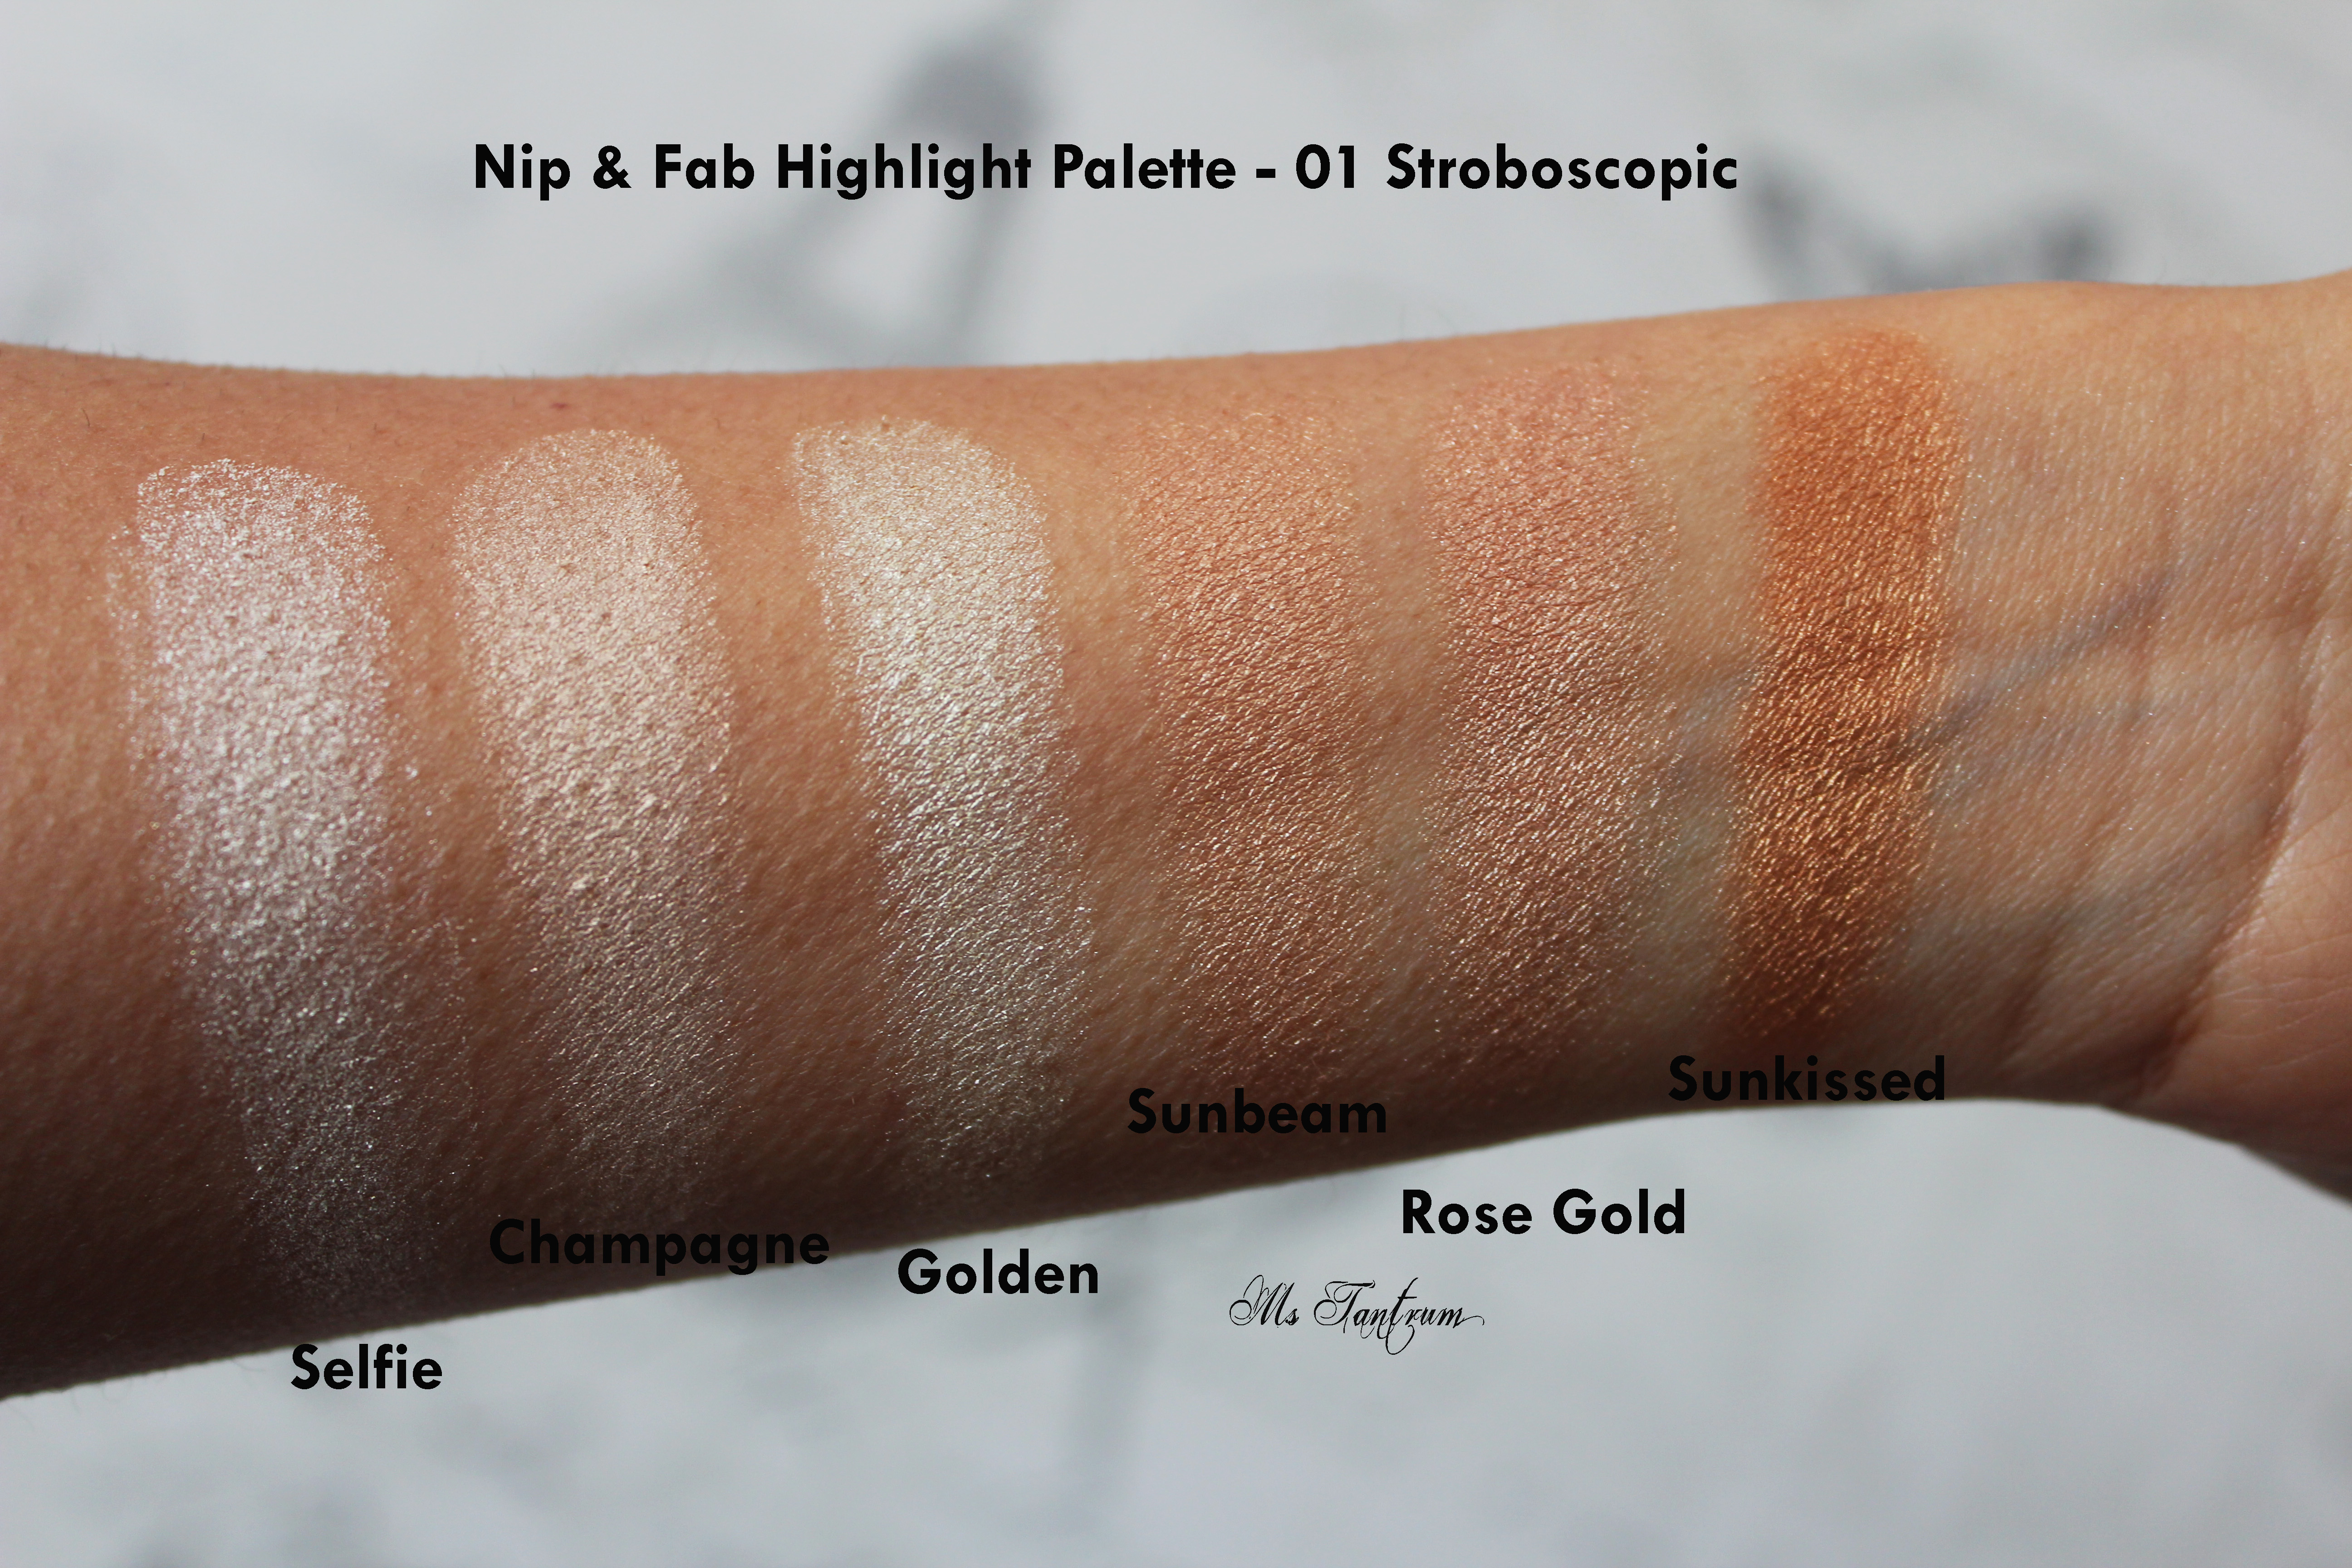 Nip & Fab Highlight Palette Swatches